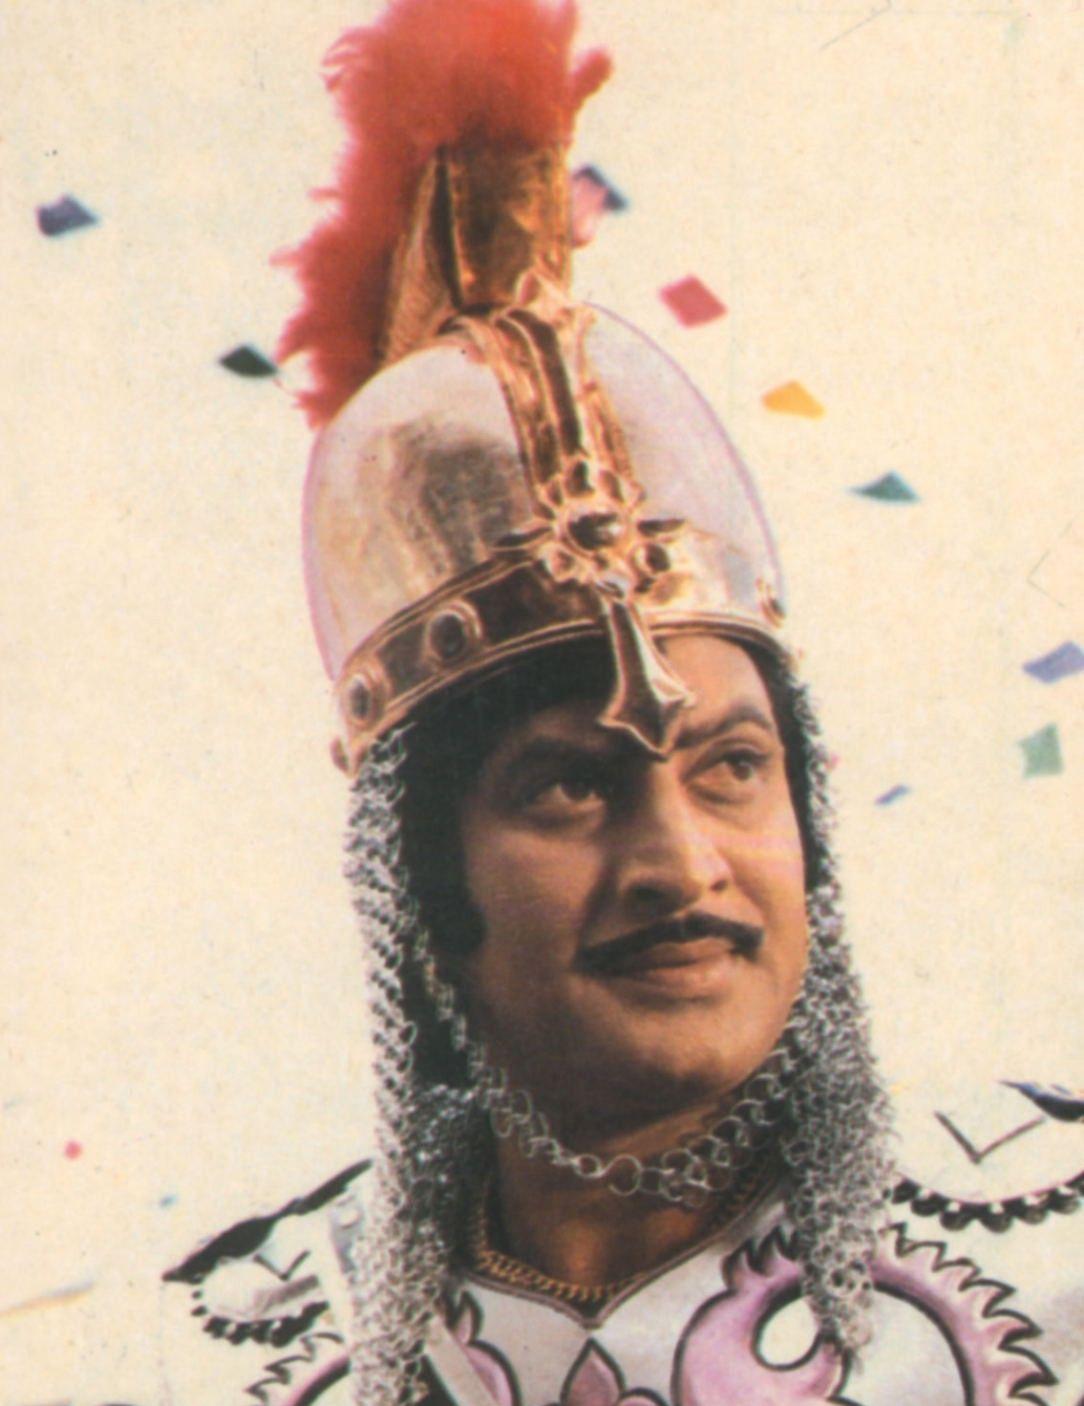 B'day Special: Super Star Krishna Rare And Unseen Photos